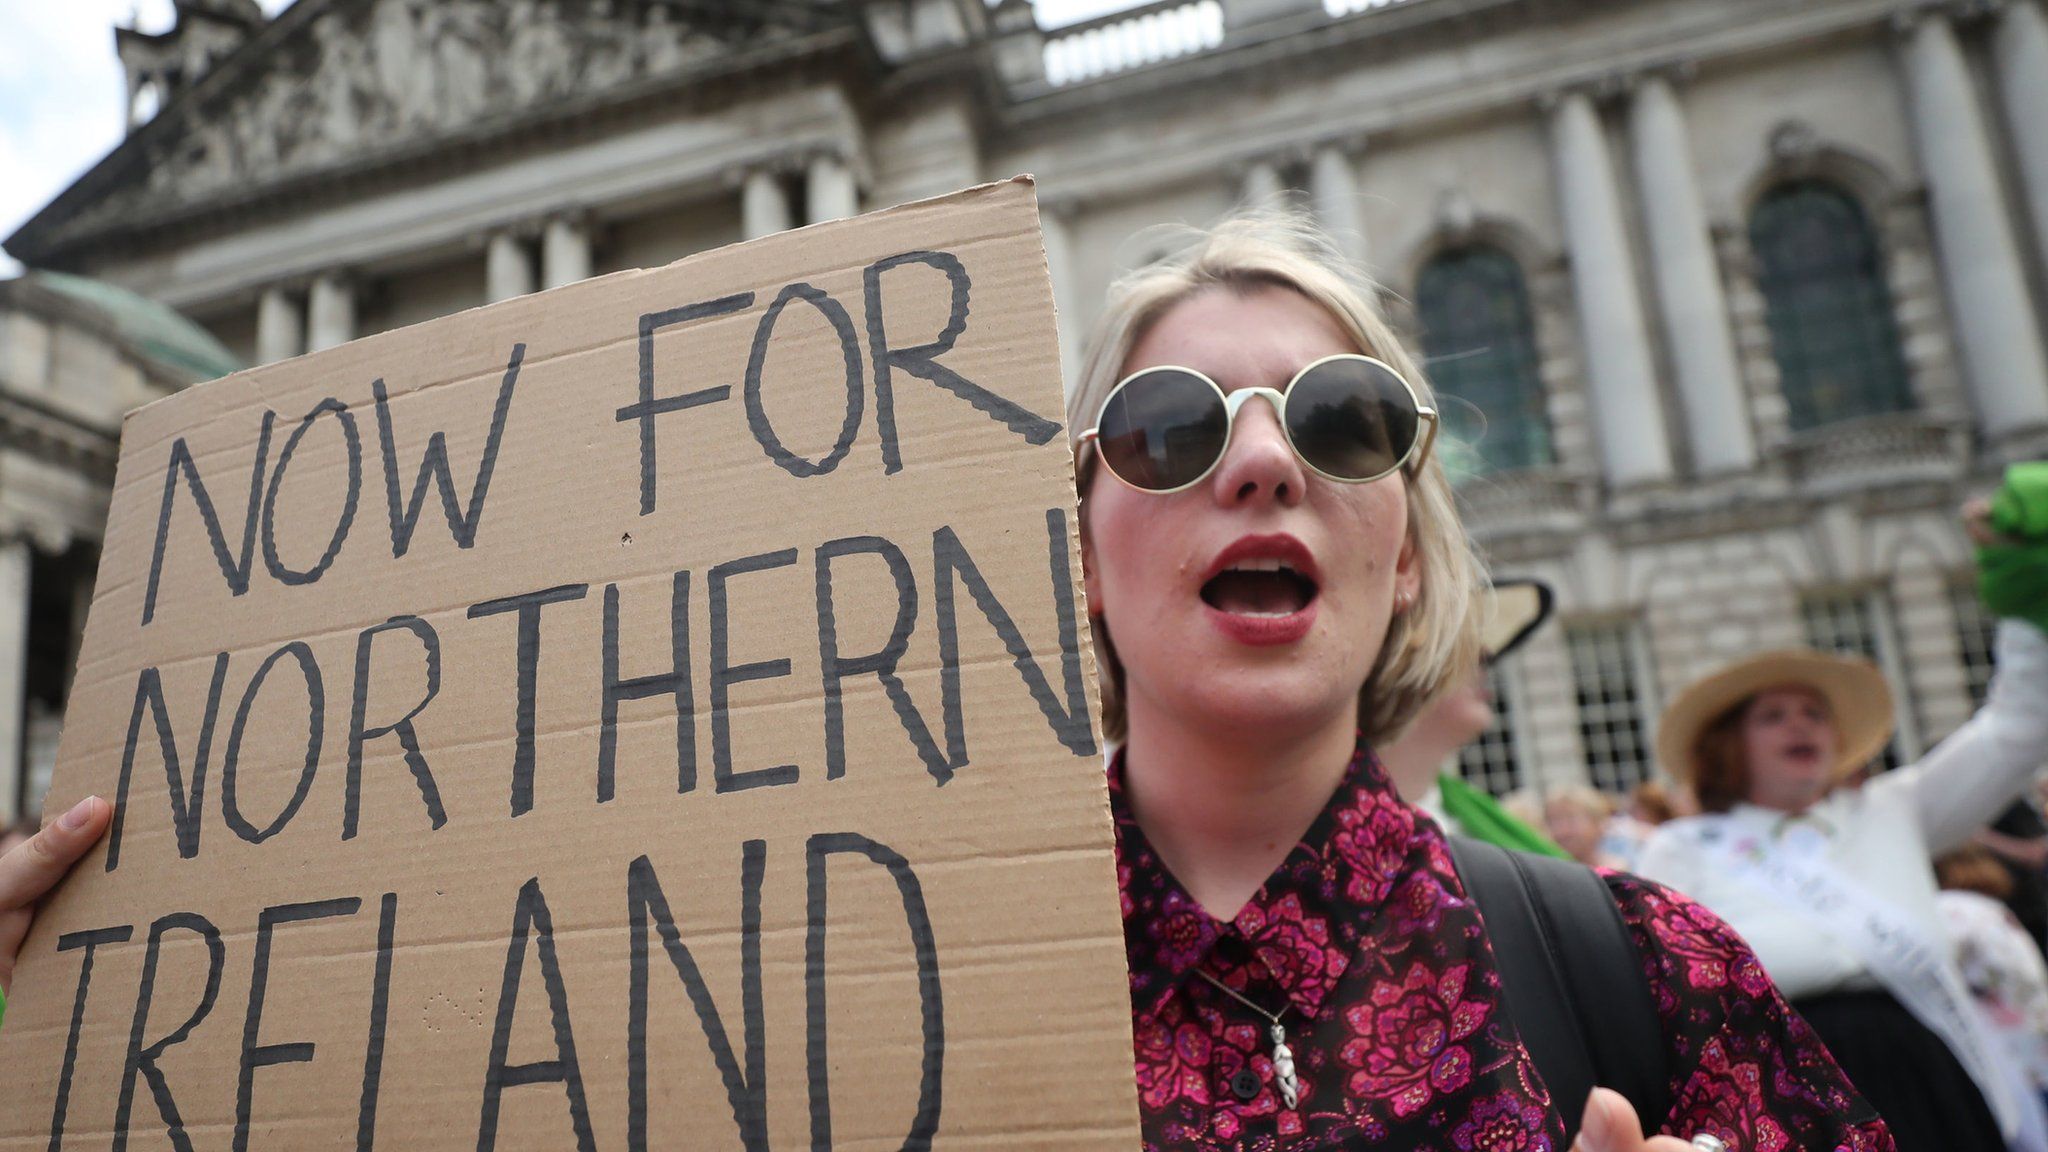 A woman calling for abortion reform in Northern Ireland